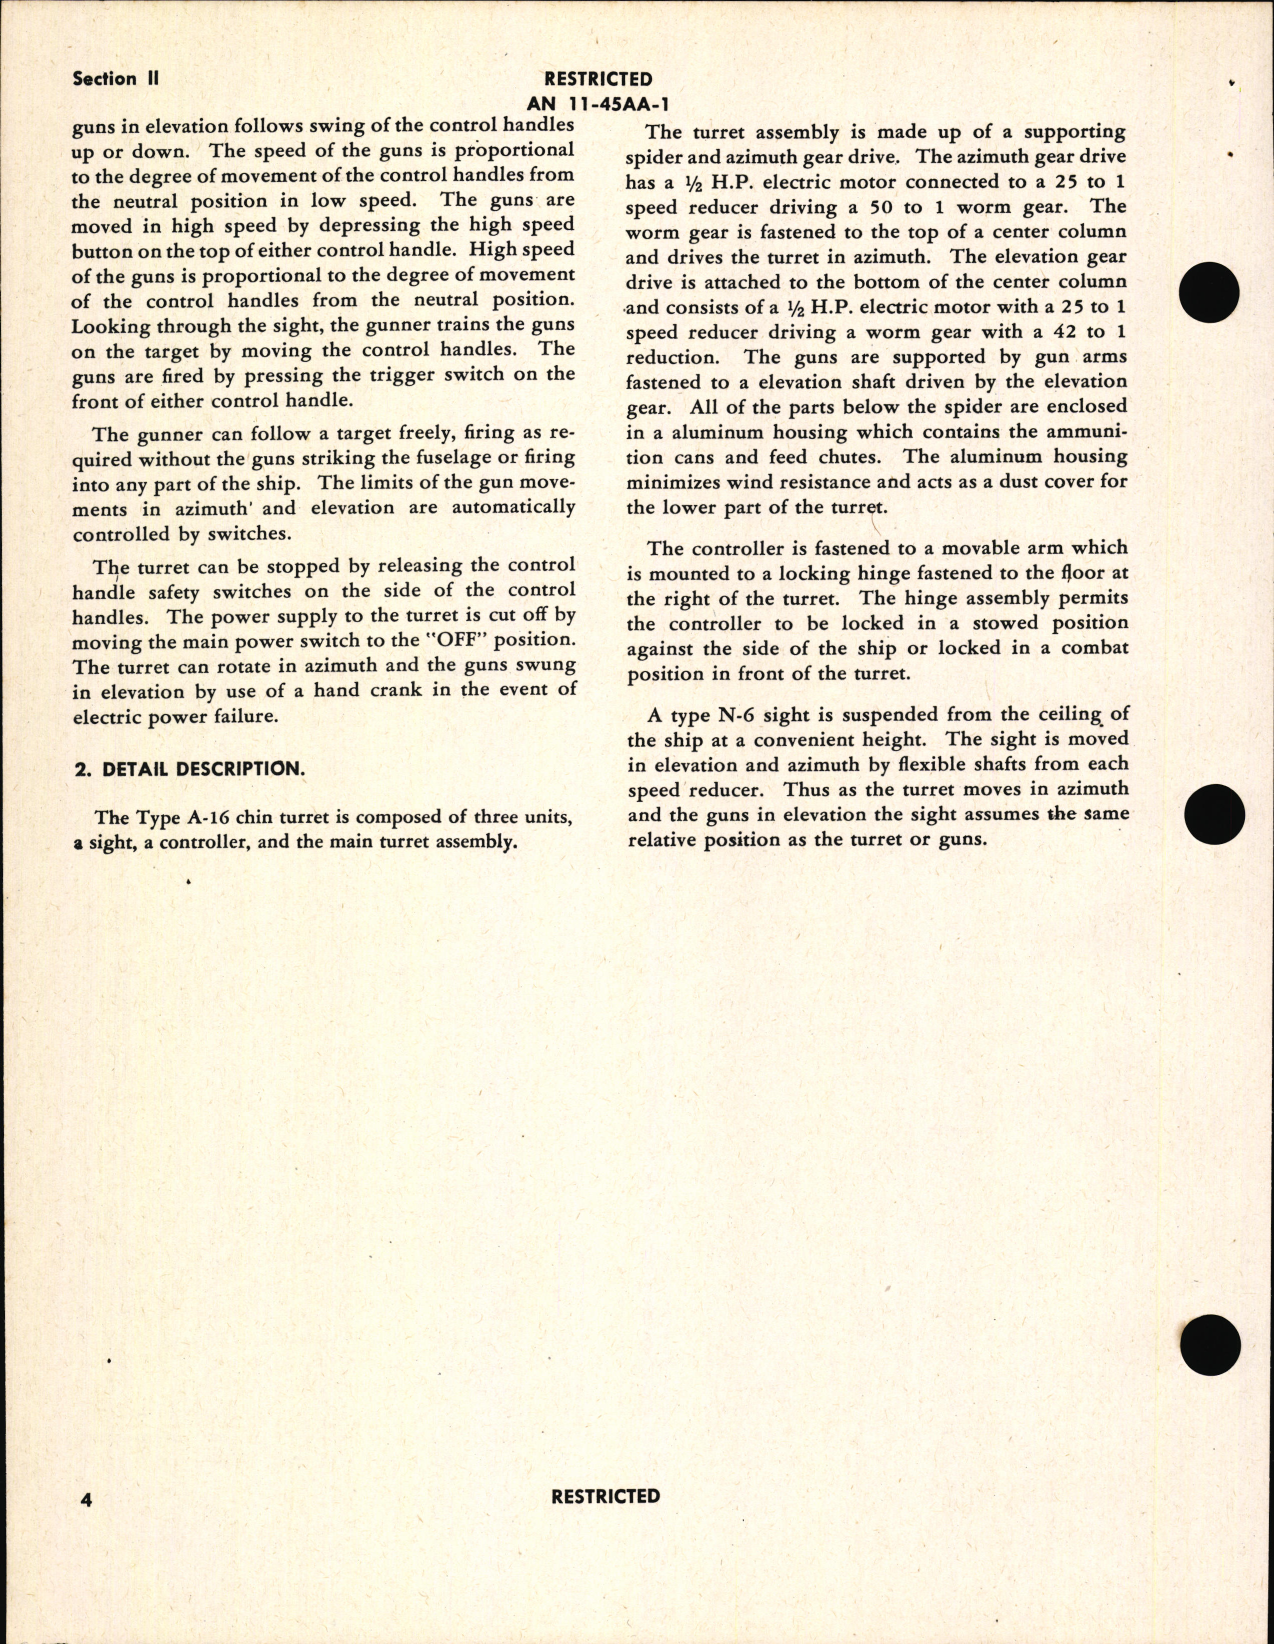 Sample page 8 from AirCorps Library document: Operation and Service Instructions for Chin Turret Type A-16